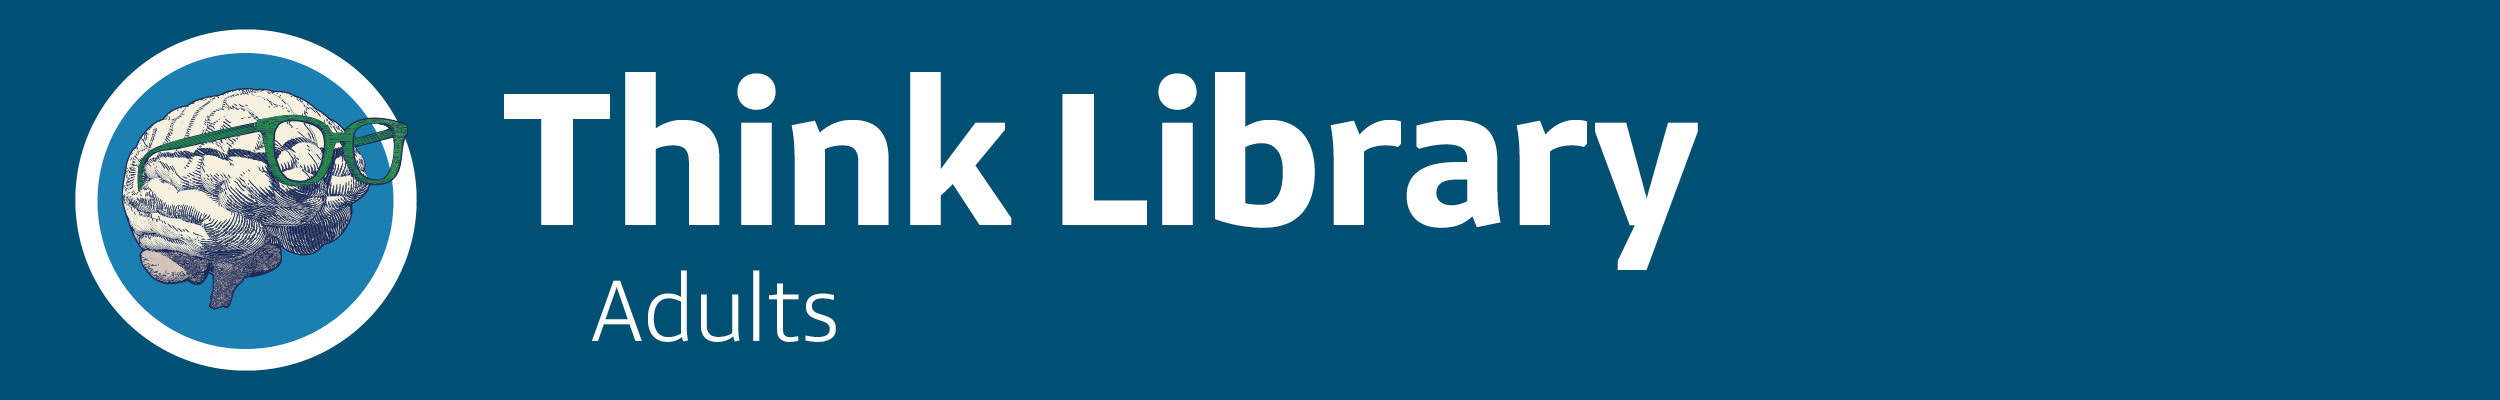 Think Library: For Adults